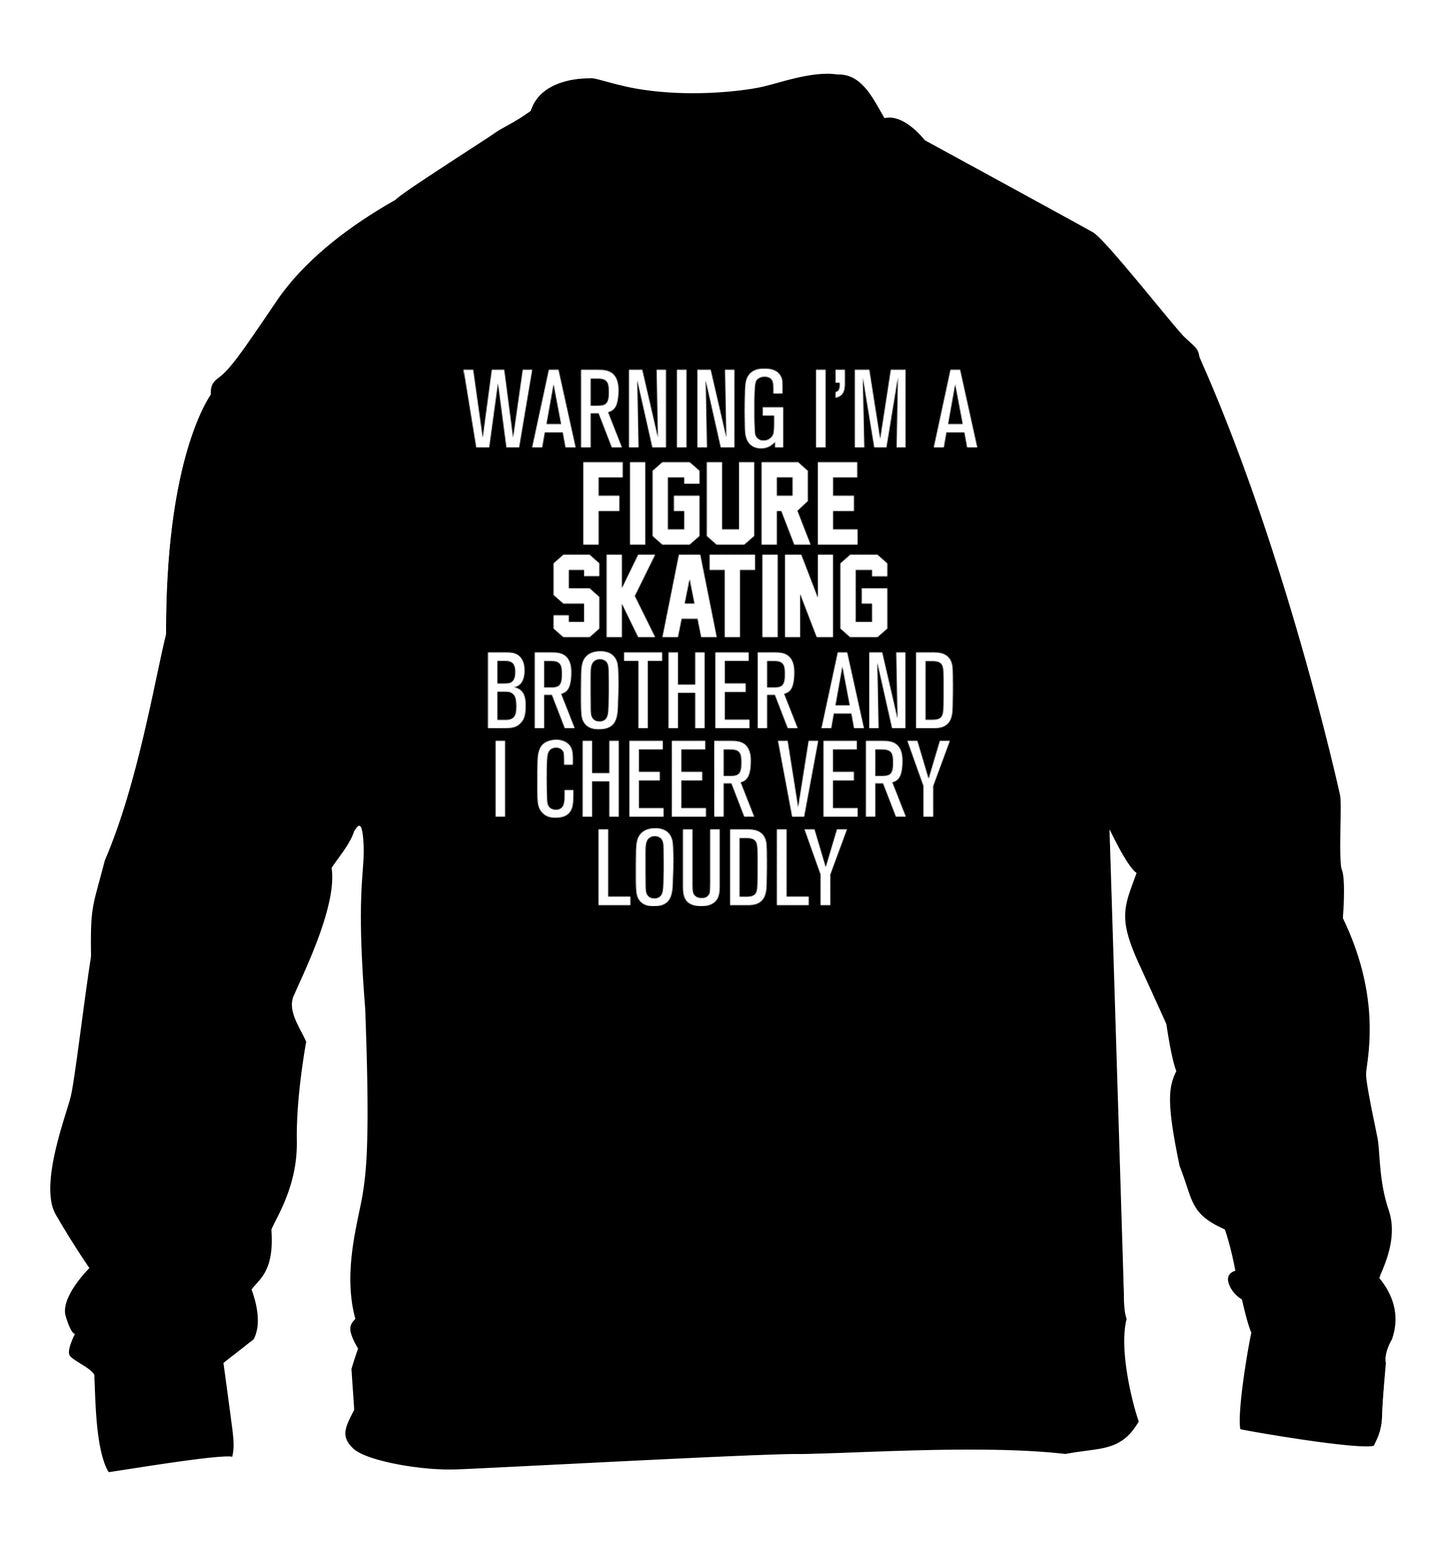 Warning I'm a figure skating brother and I cheer very loudly children's black sweater 12-14 Years